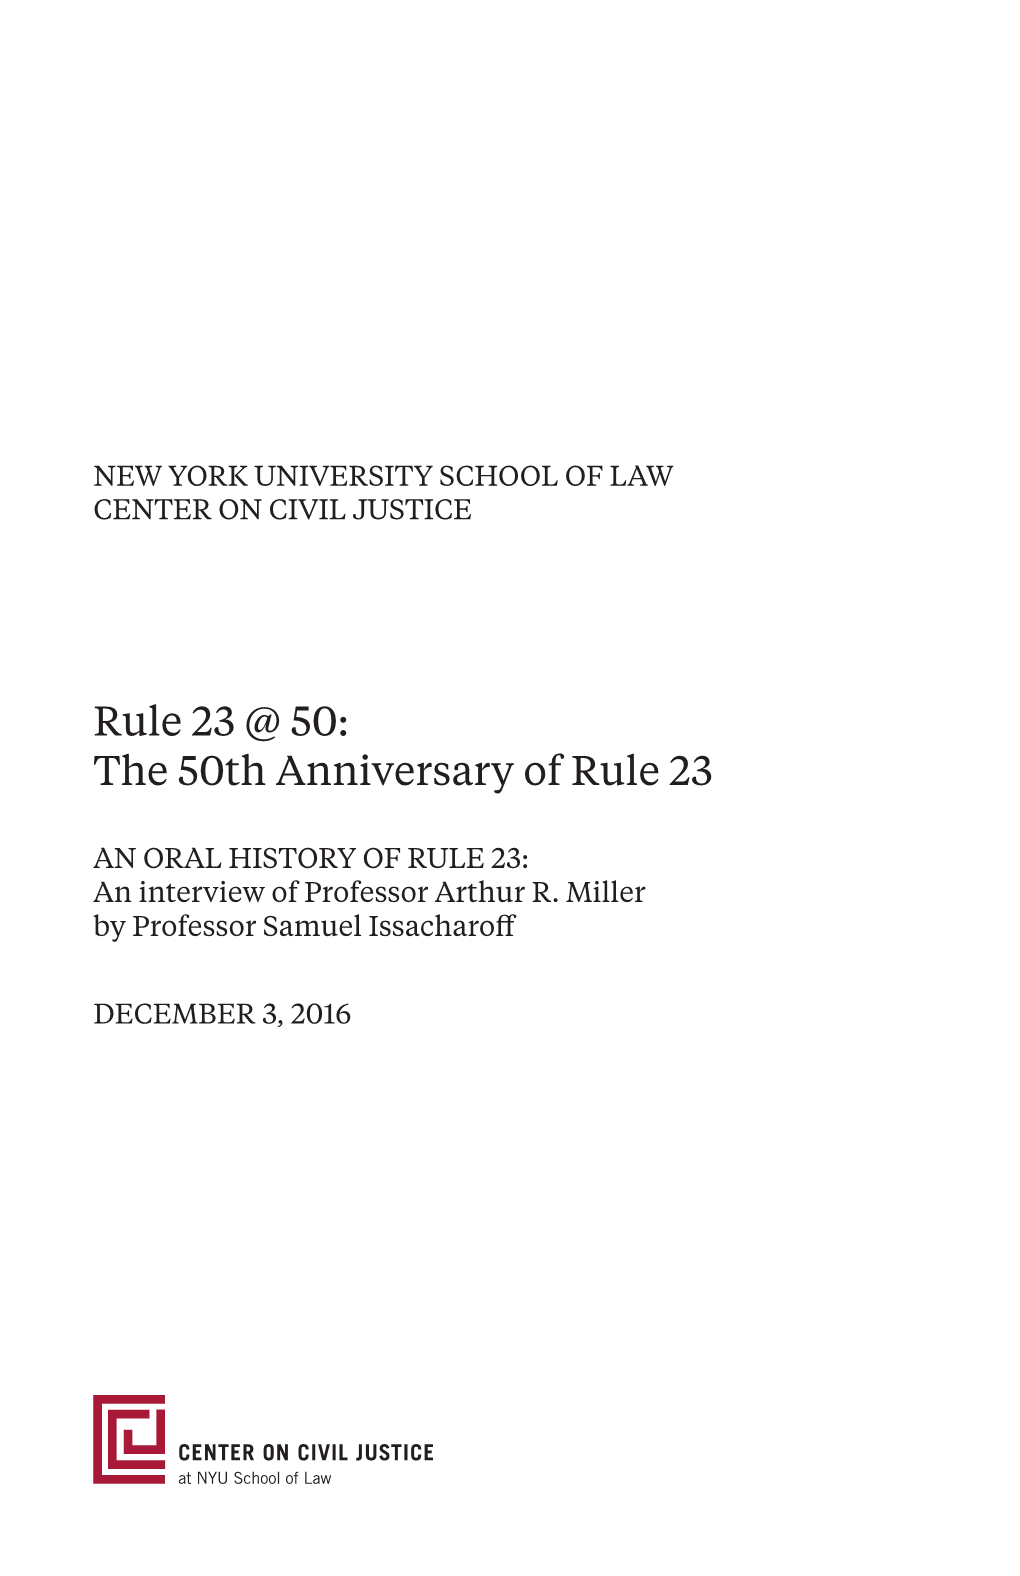 Rule 23 @ 50: the 50Th Anniversary of Rule 23